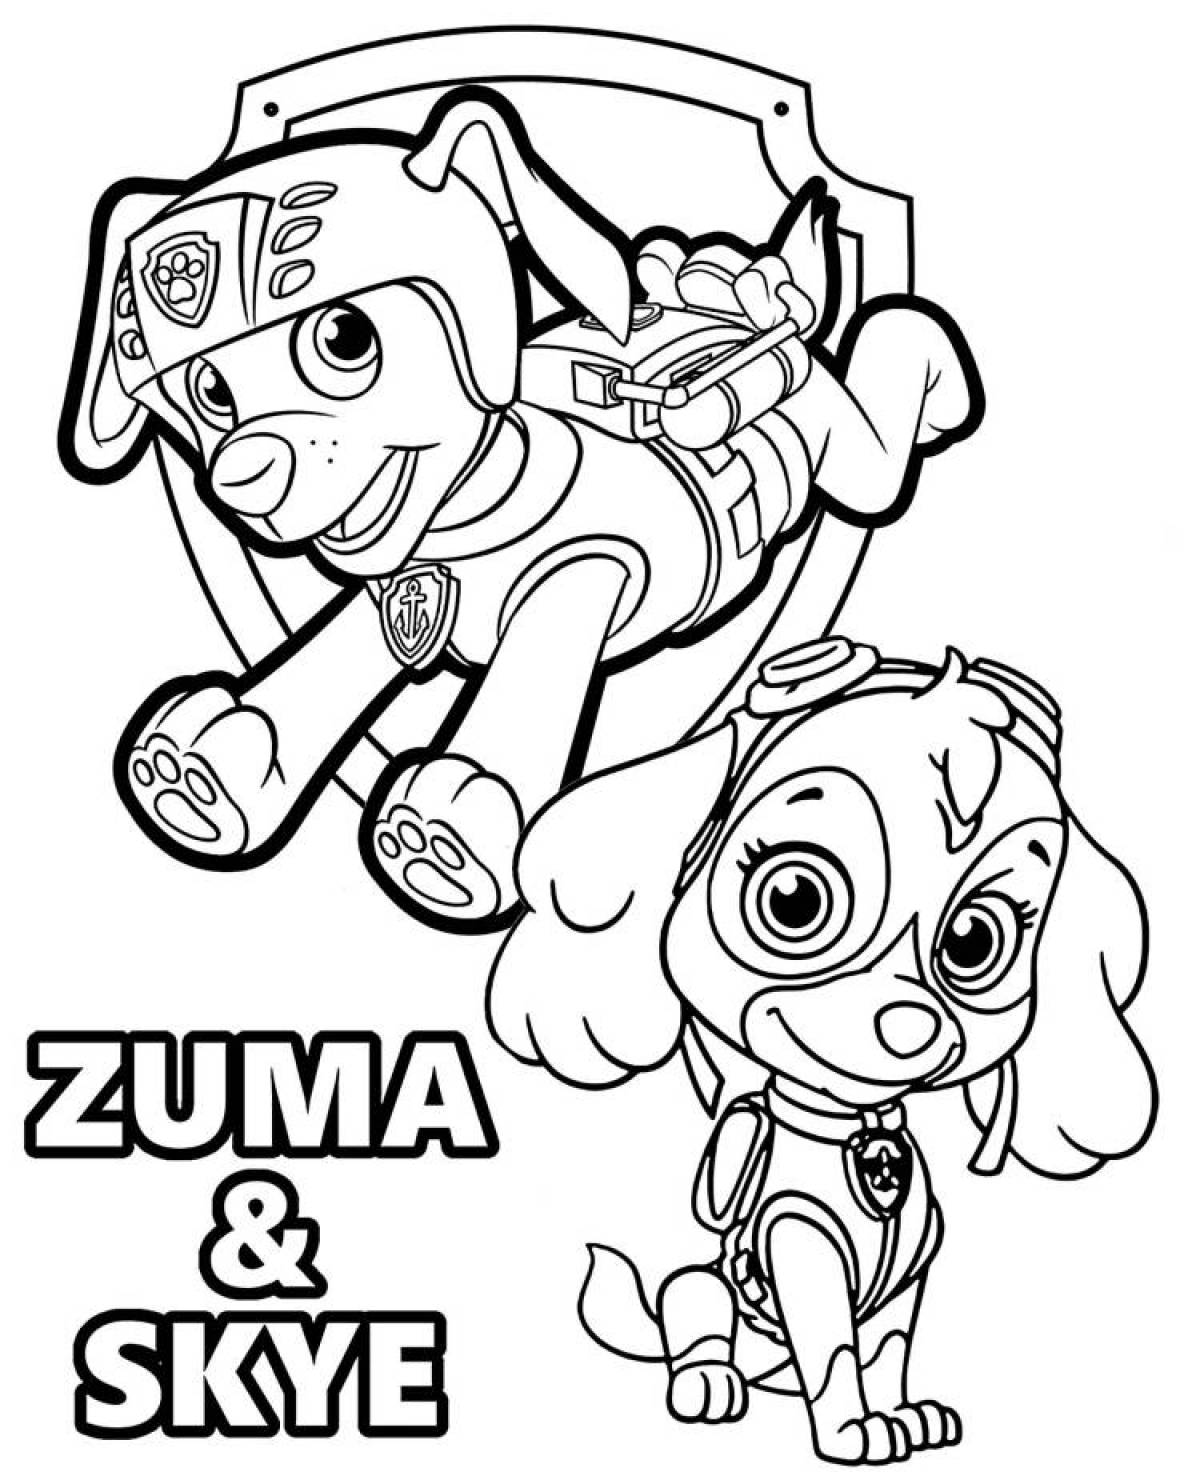 Zuma fairytale coloring page